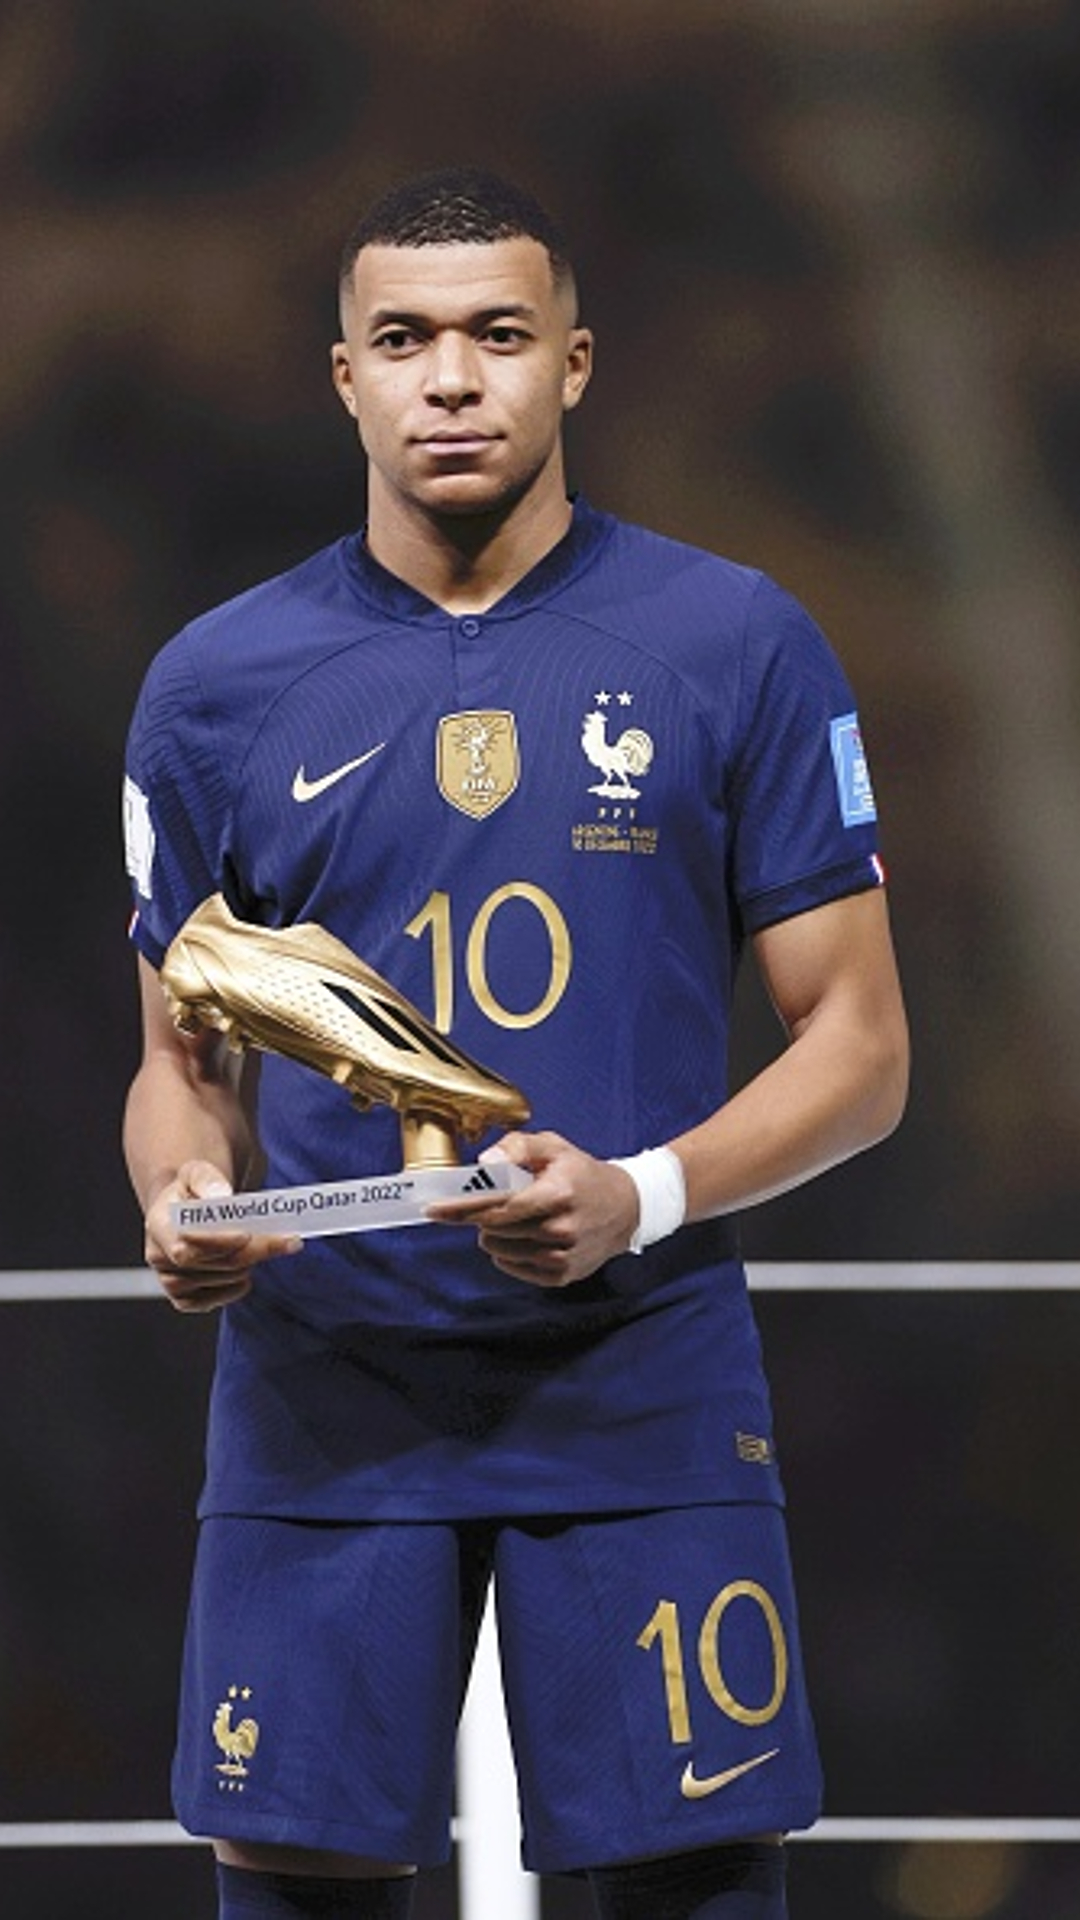 FIFA World Cup 2022 Mbappe secures Golden Boot with 8 goals, Messi